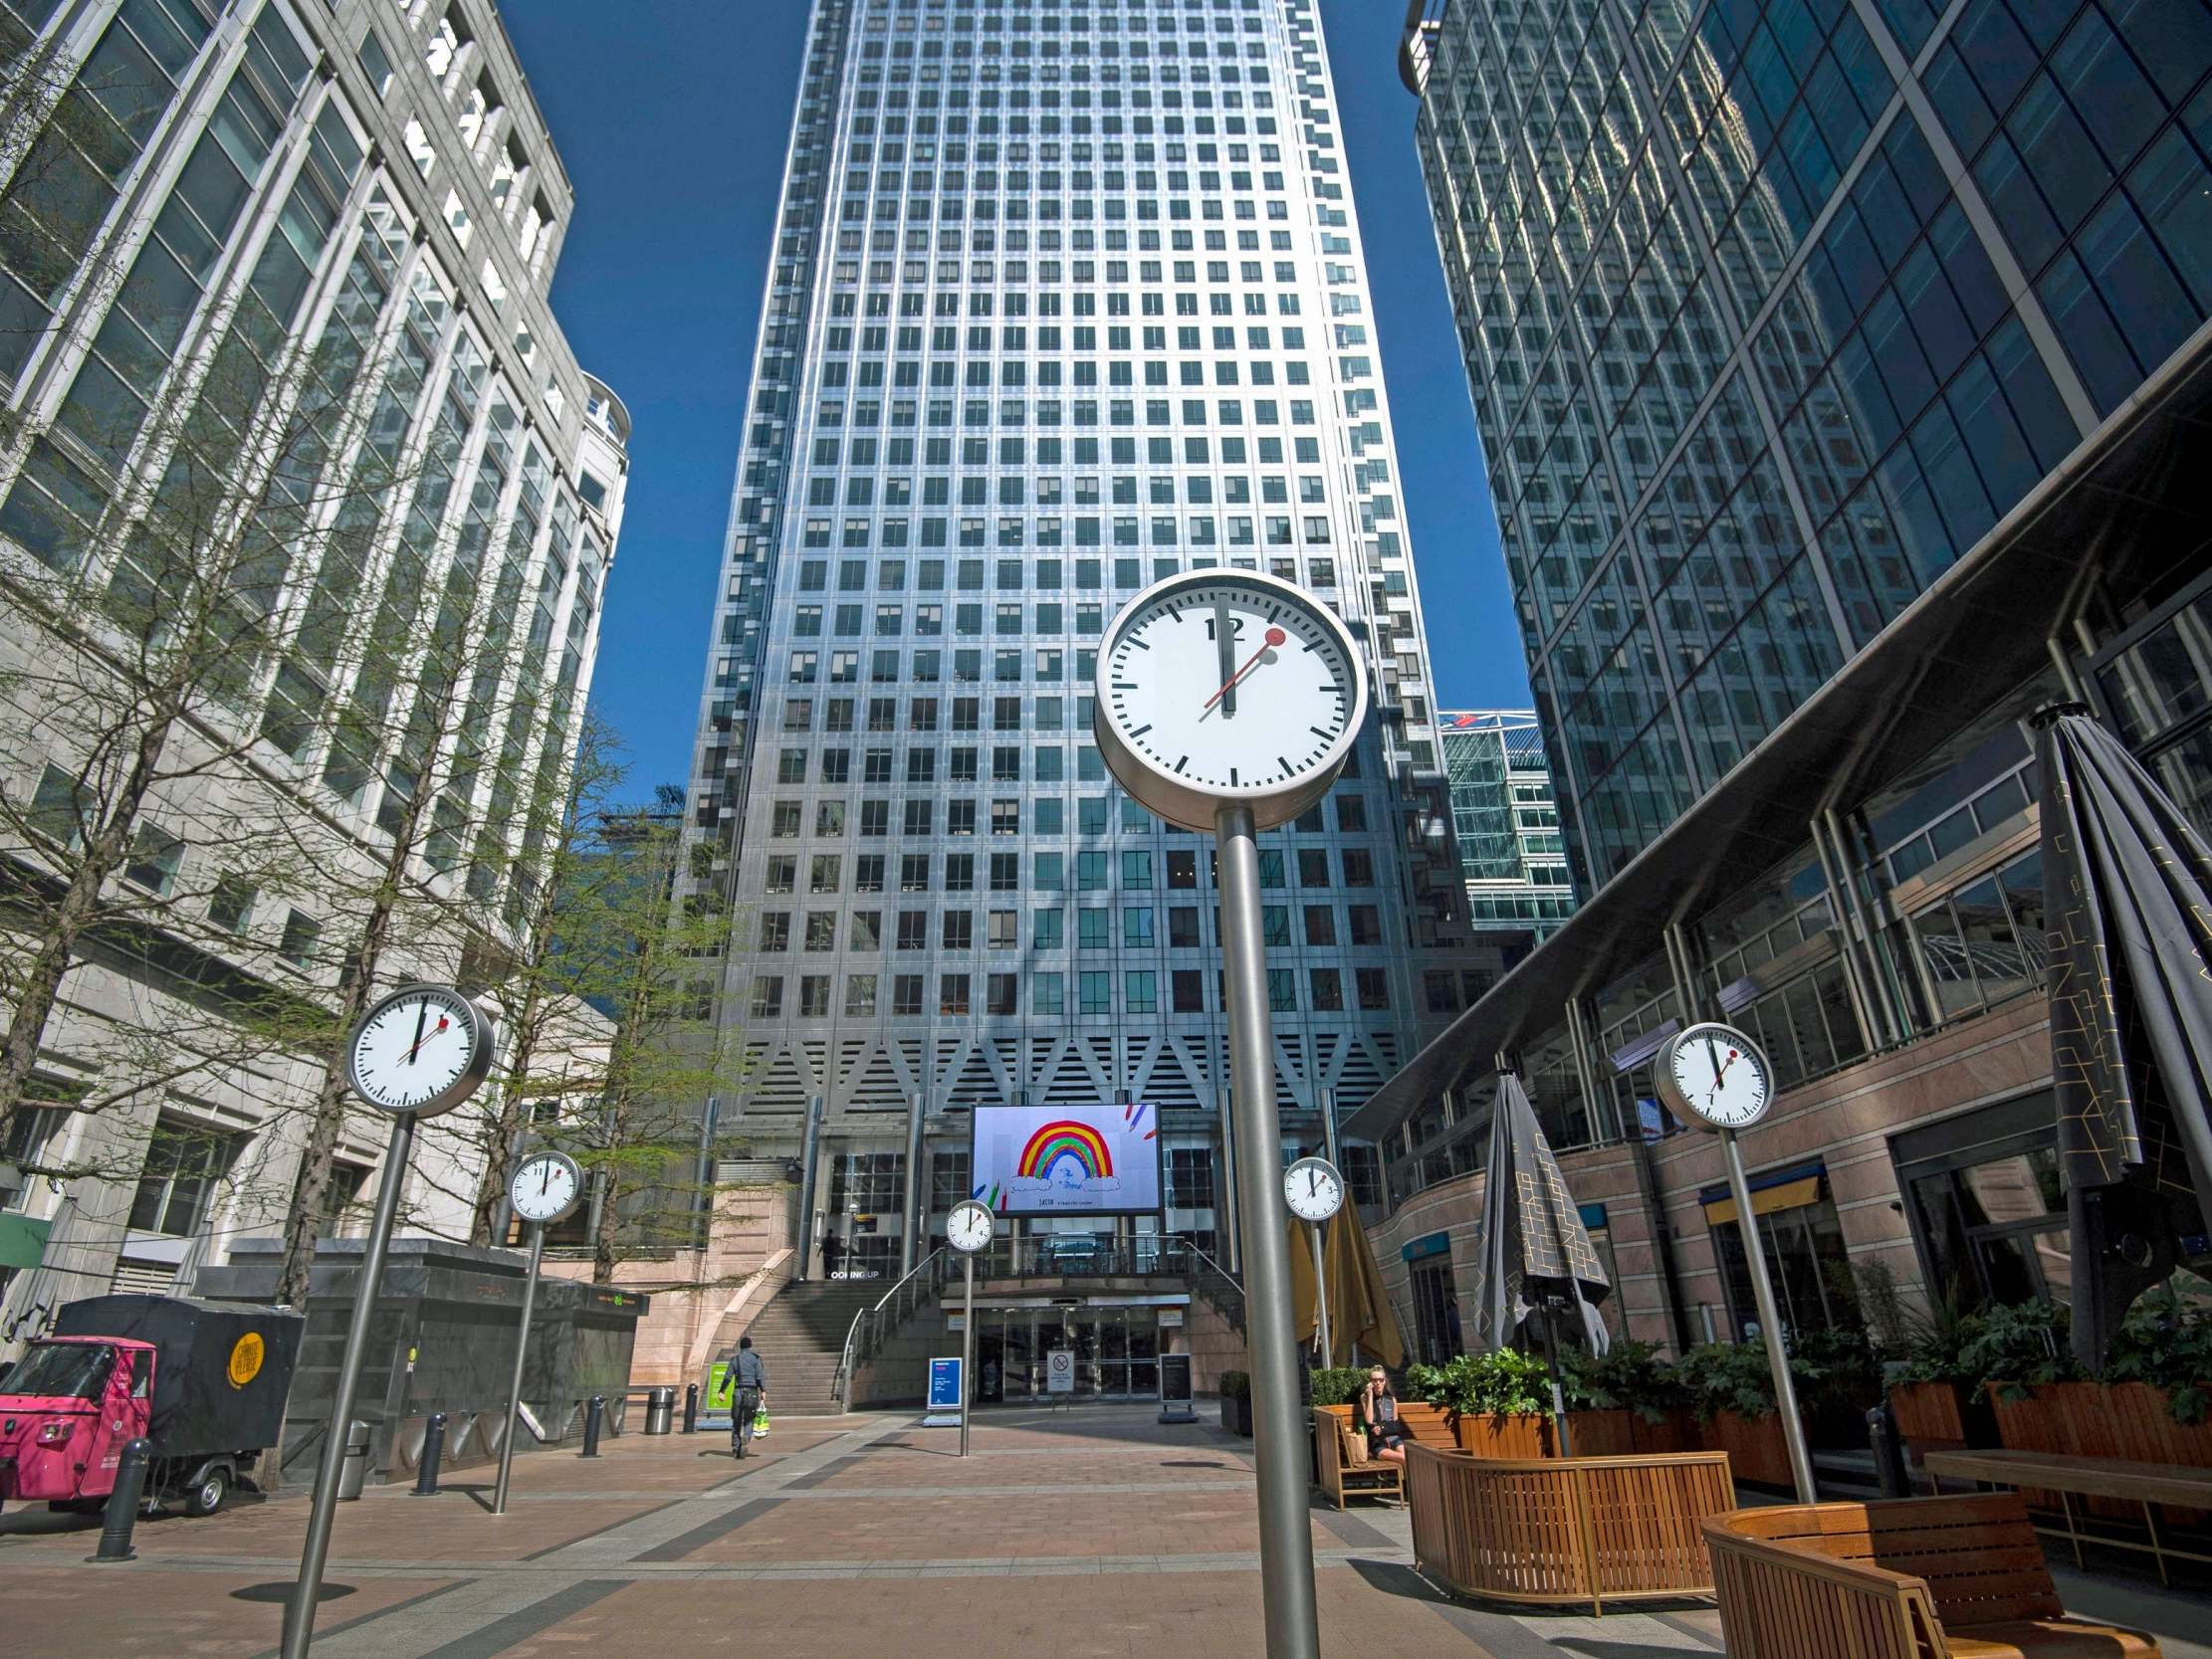 Canary Wharf has more than 300 shops, bars, cafes and restaurants but only 7,000 of its 120,000 workers have so far returned